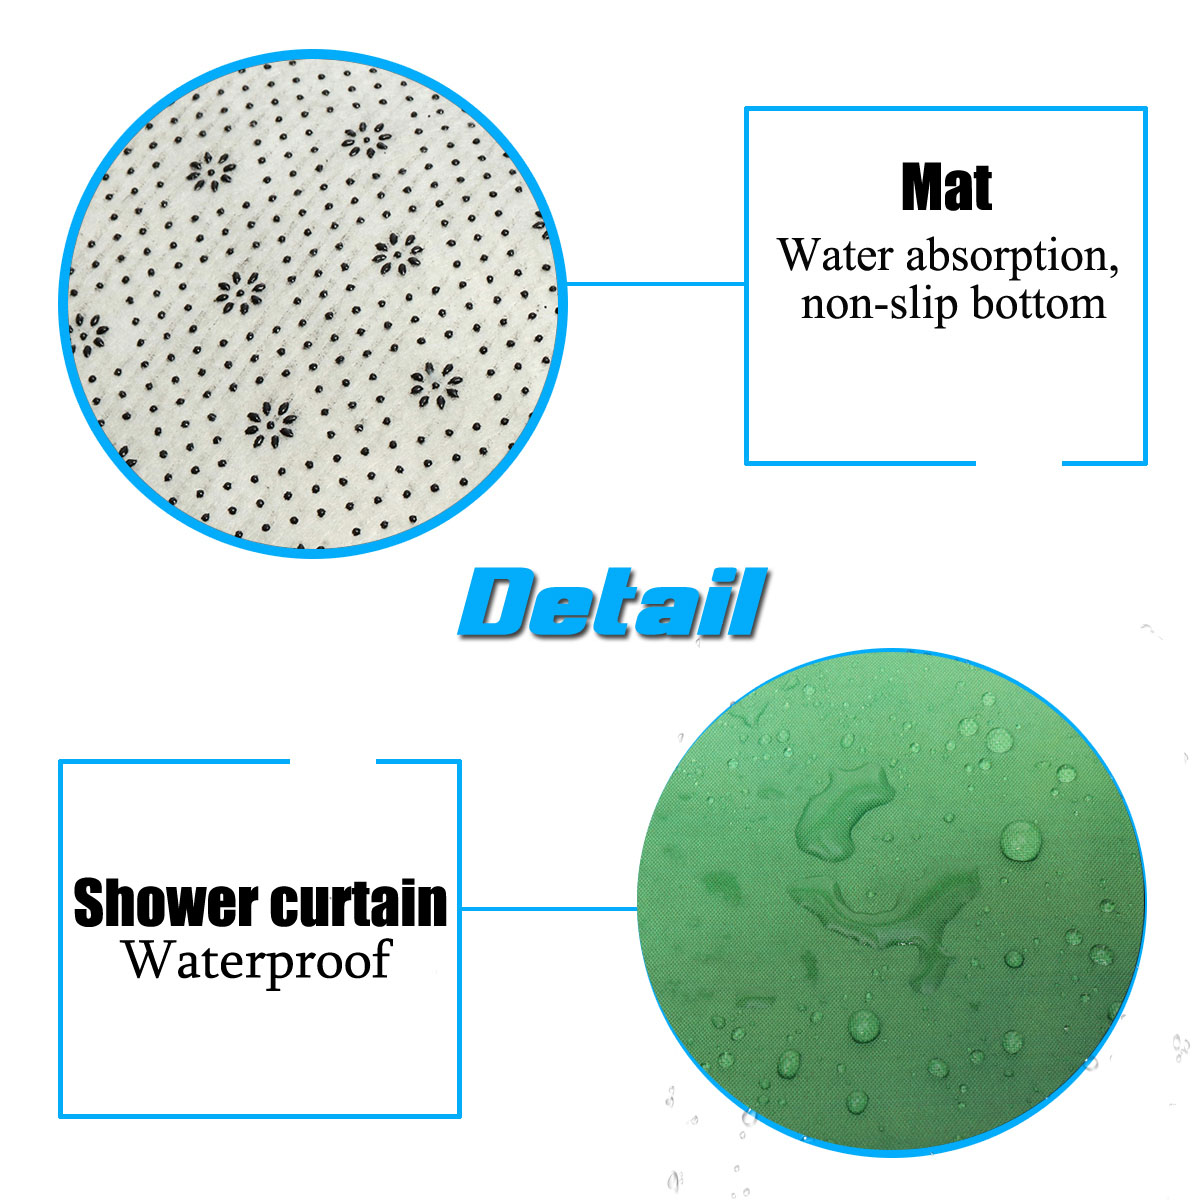 4Pcs-180x180cm-Bamboo-Pebbles-Bathroom-Shower-Curtain-with-Hooks-Toliet-Cover-Mat-1425368